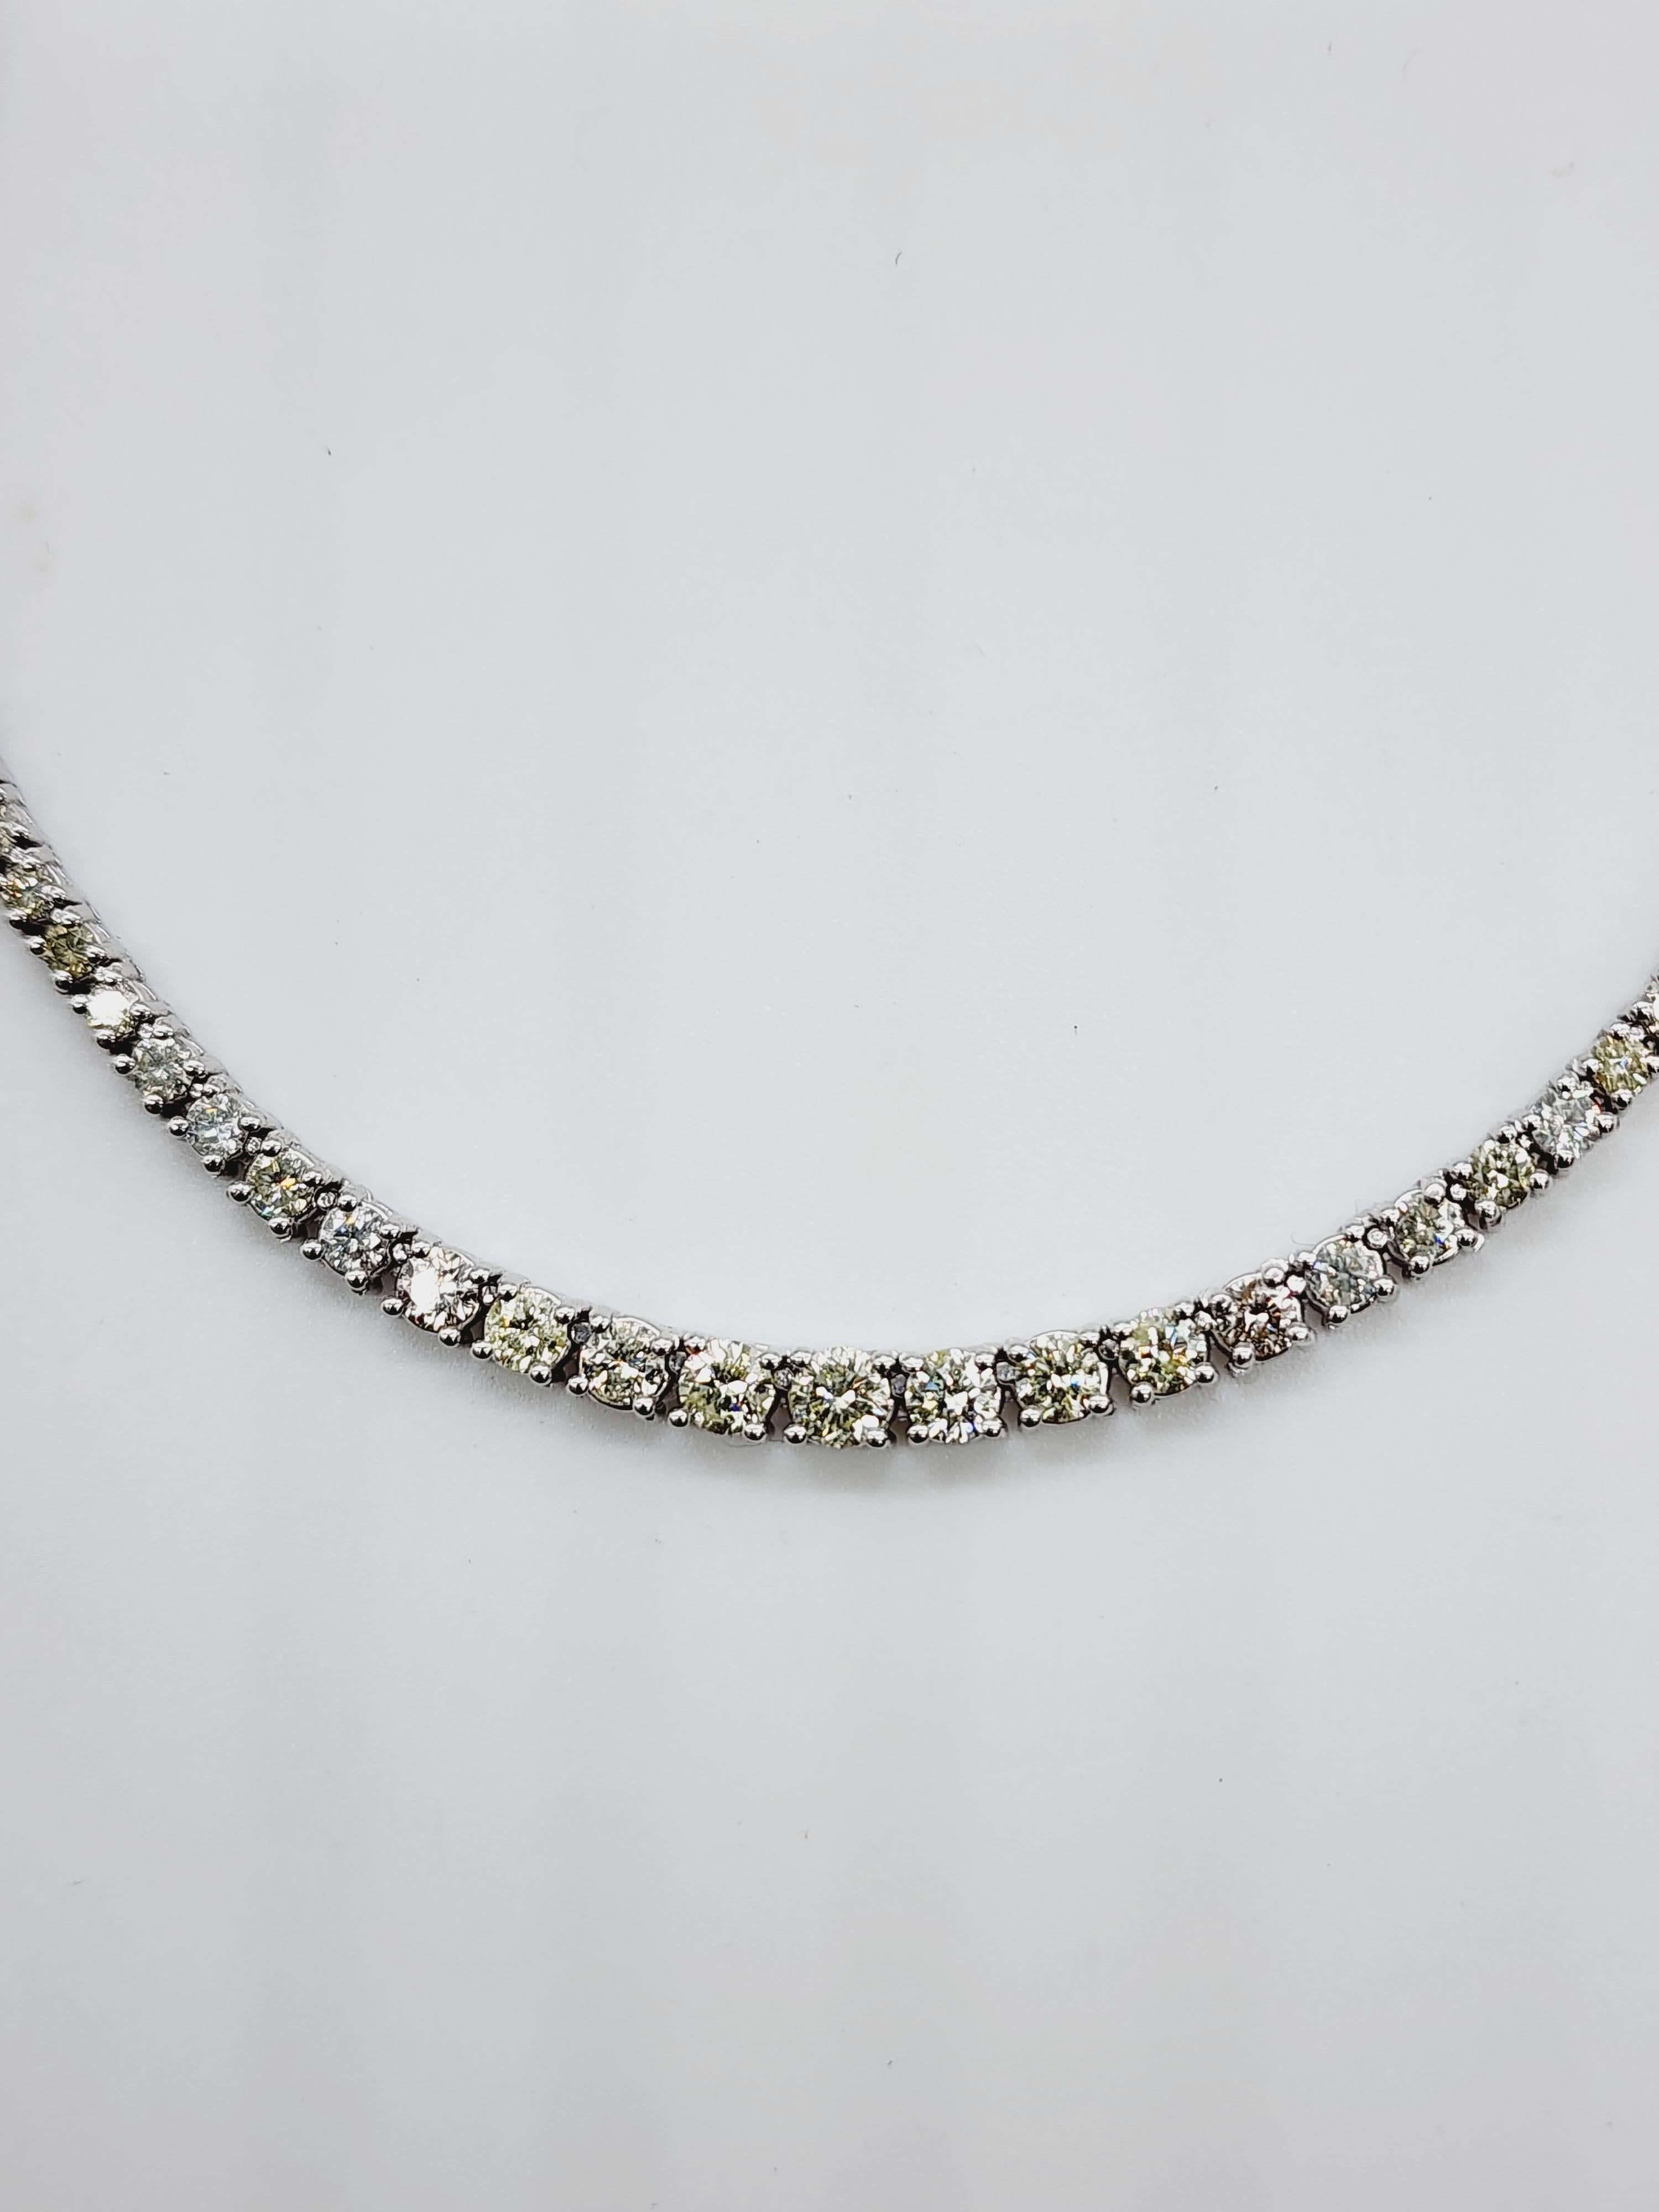 5 Carat Diamond Riviera Tennis Necklace 14 Karat White Gold 17'' In New Condition For Sale In Great Neck, NY